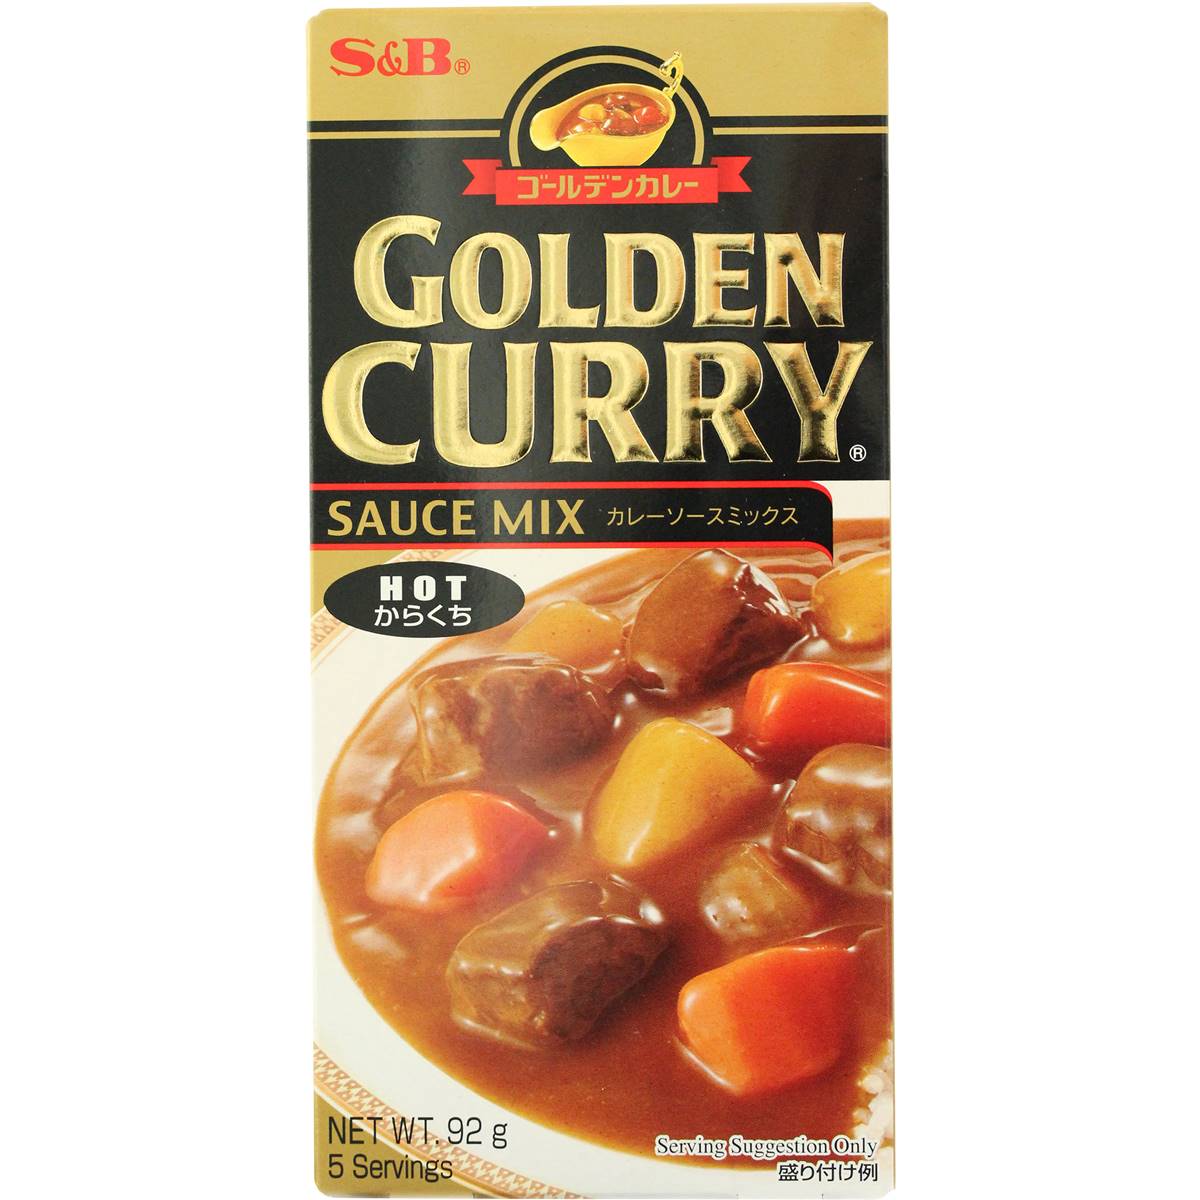 Calories in S&b Golden Curry Mix Hot